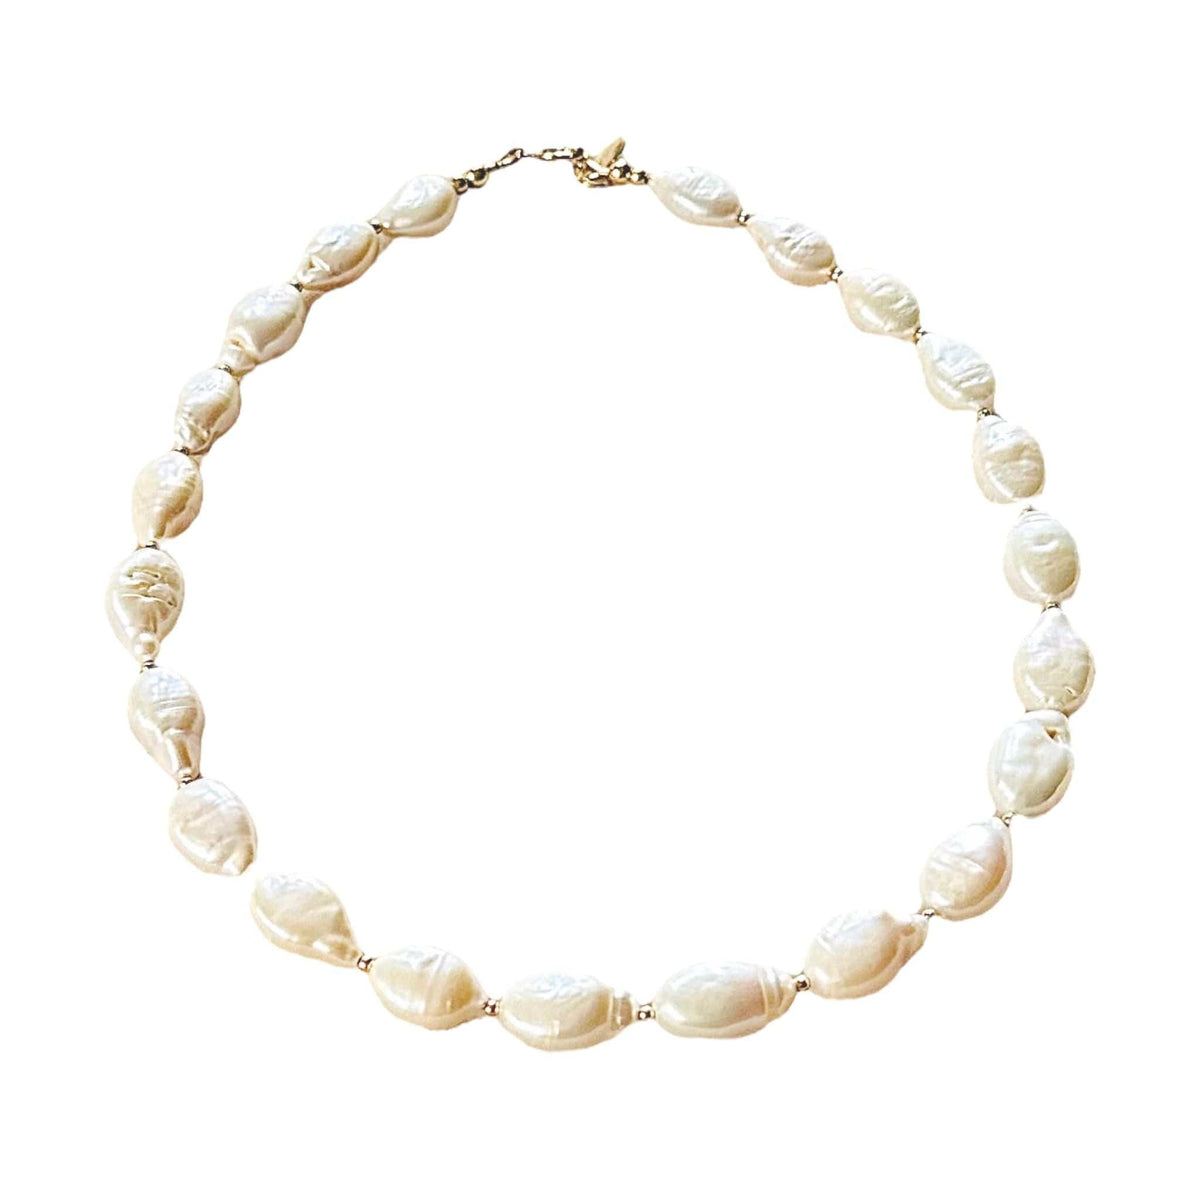 Large Keishi Pearl Choker  - White Freshwater Pearl Necklace